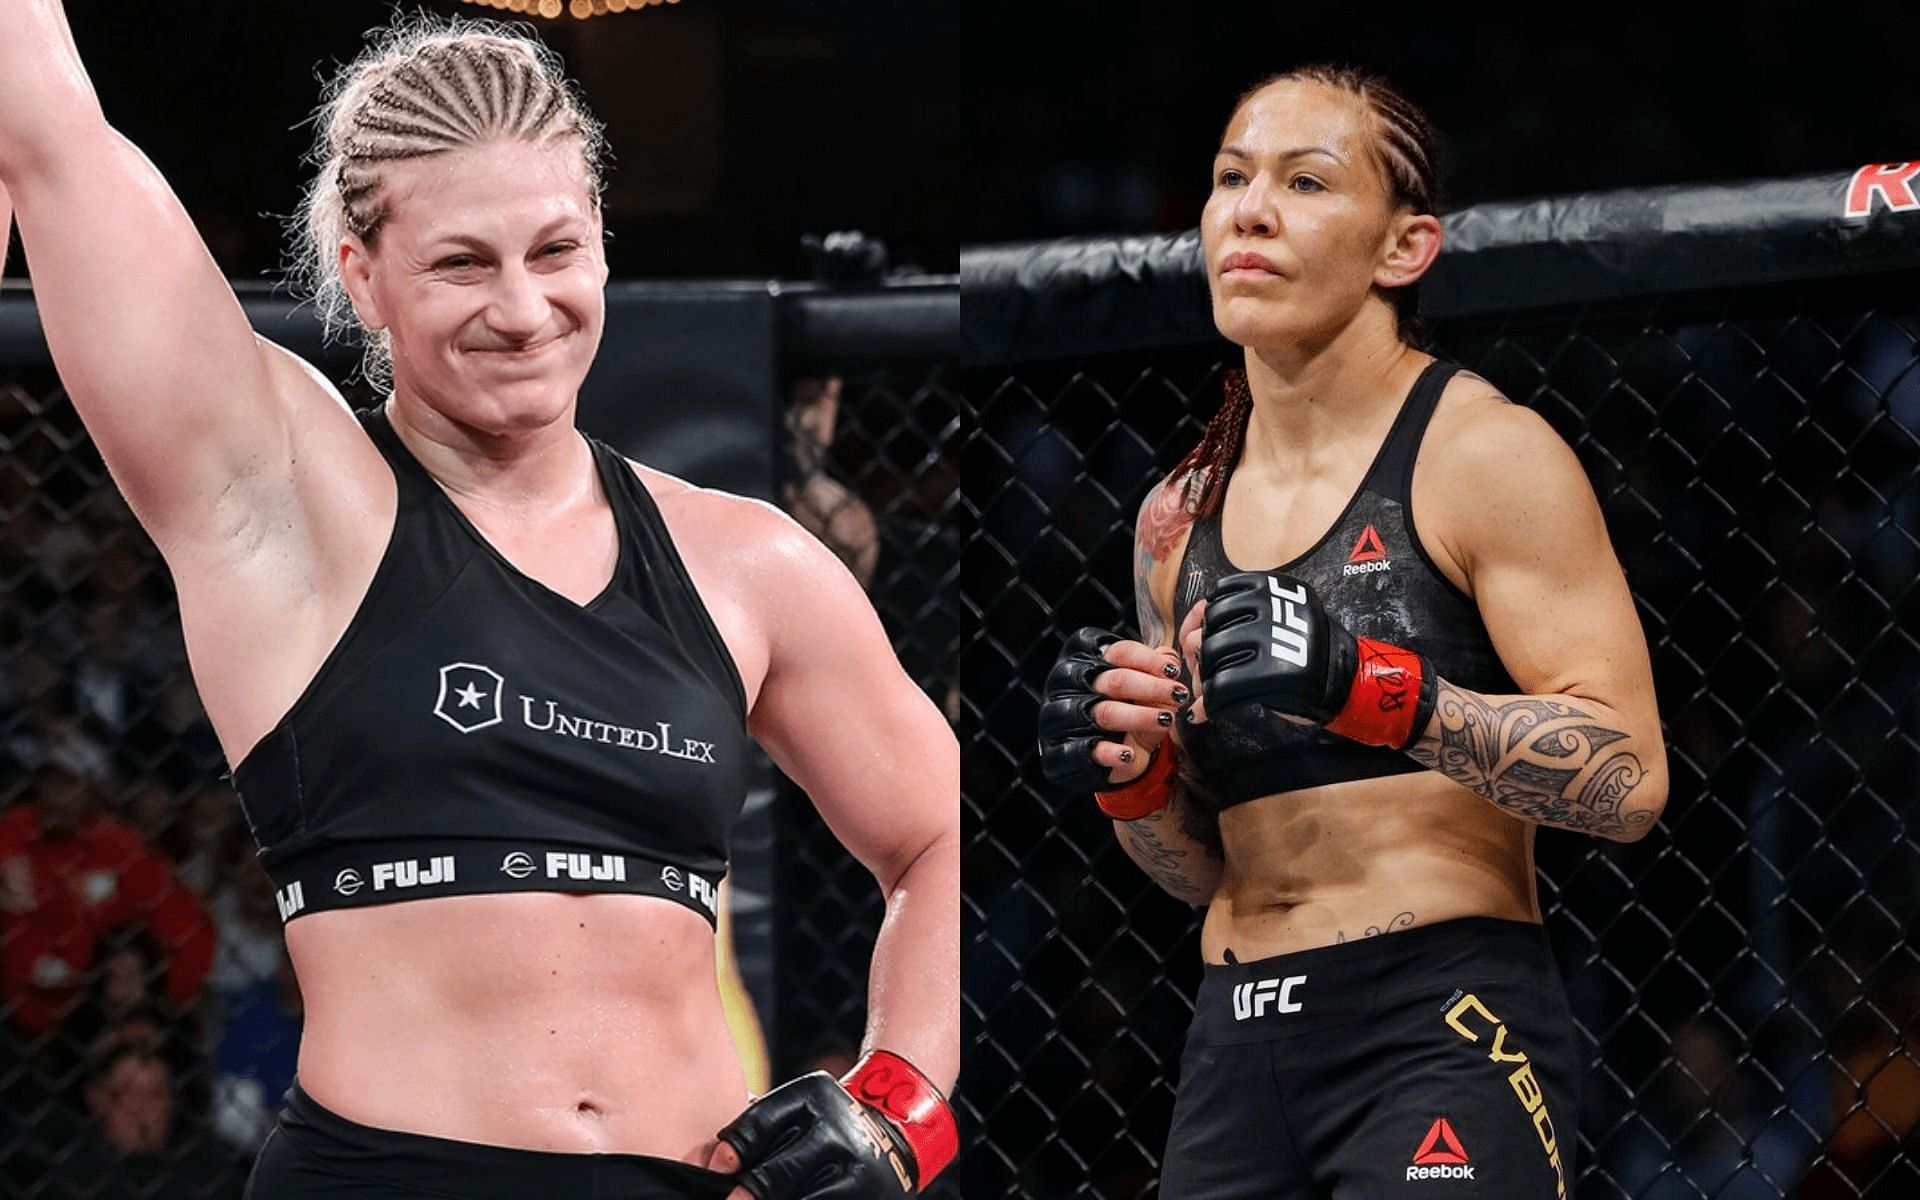 Kayla Harrison (left) and Cris Cyborg (right) [via Getty Images]